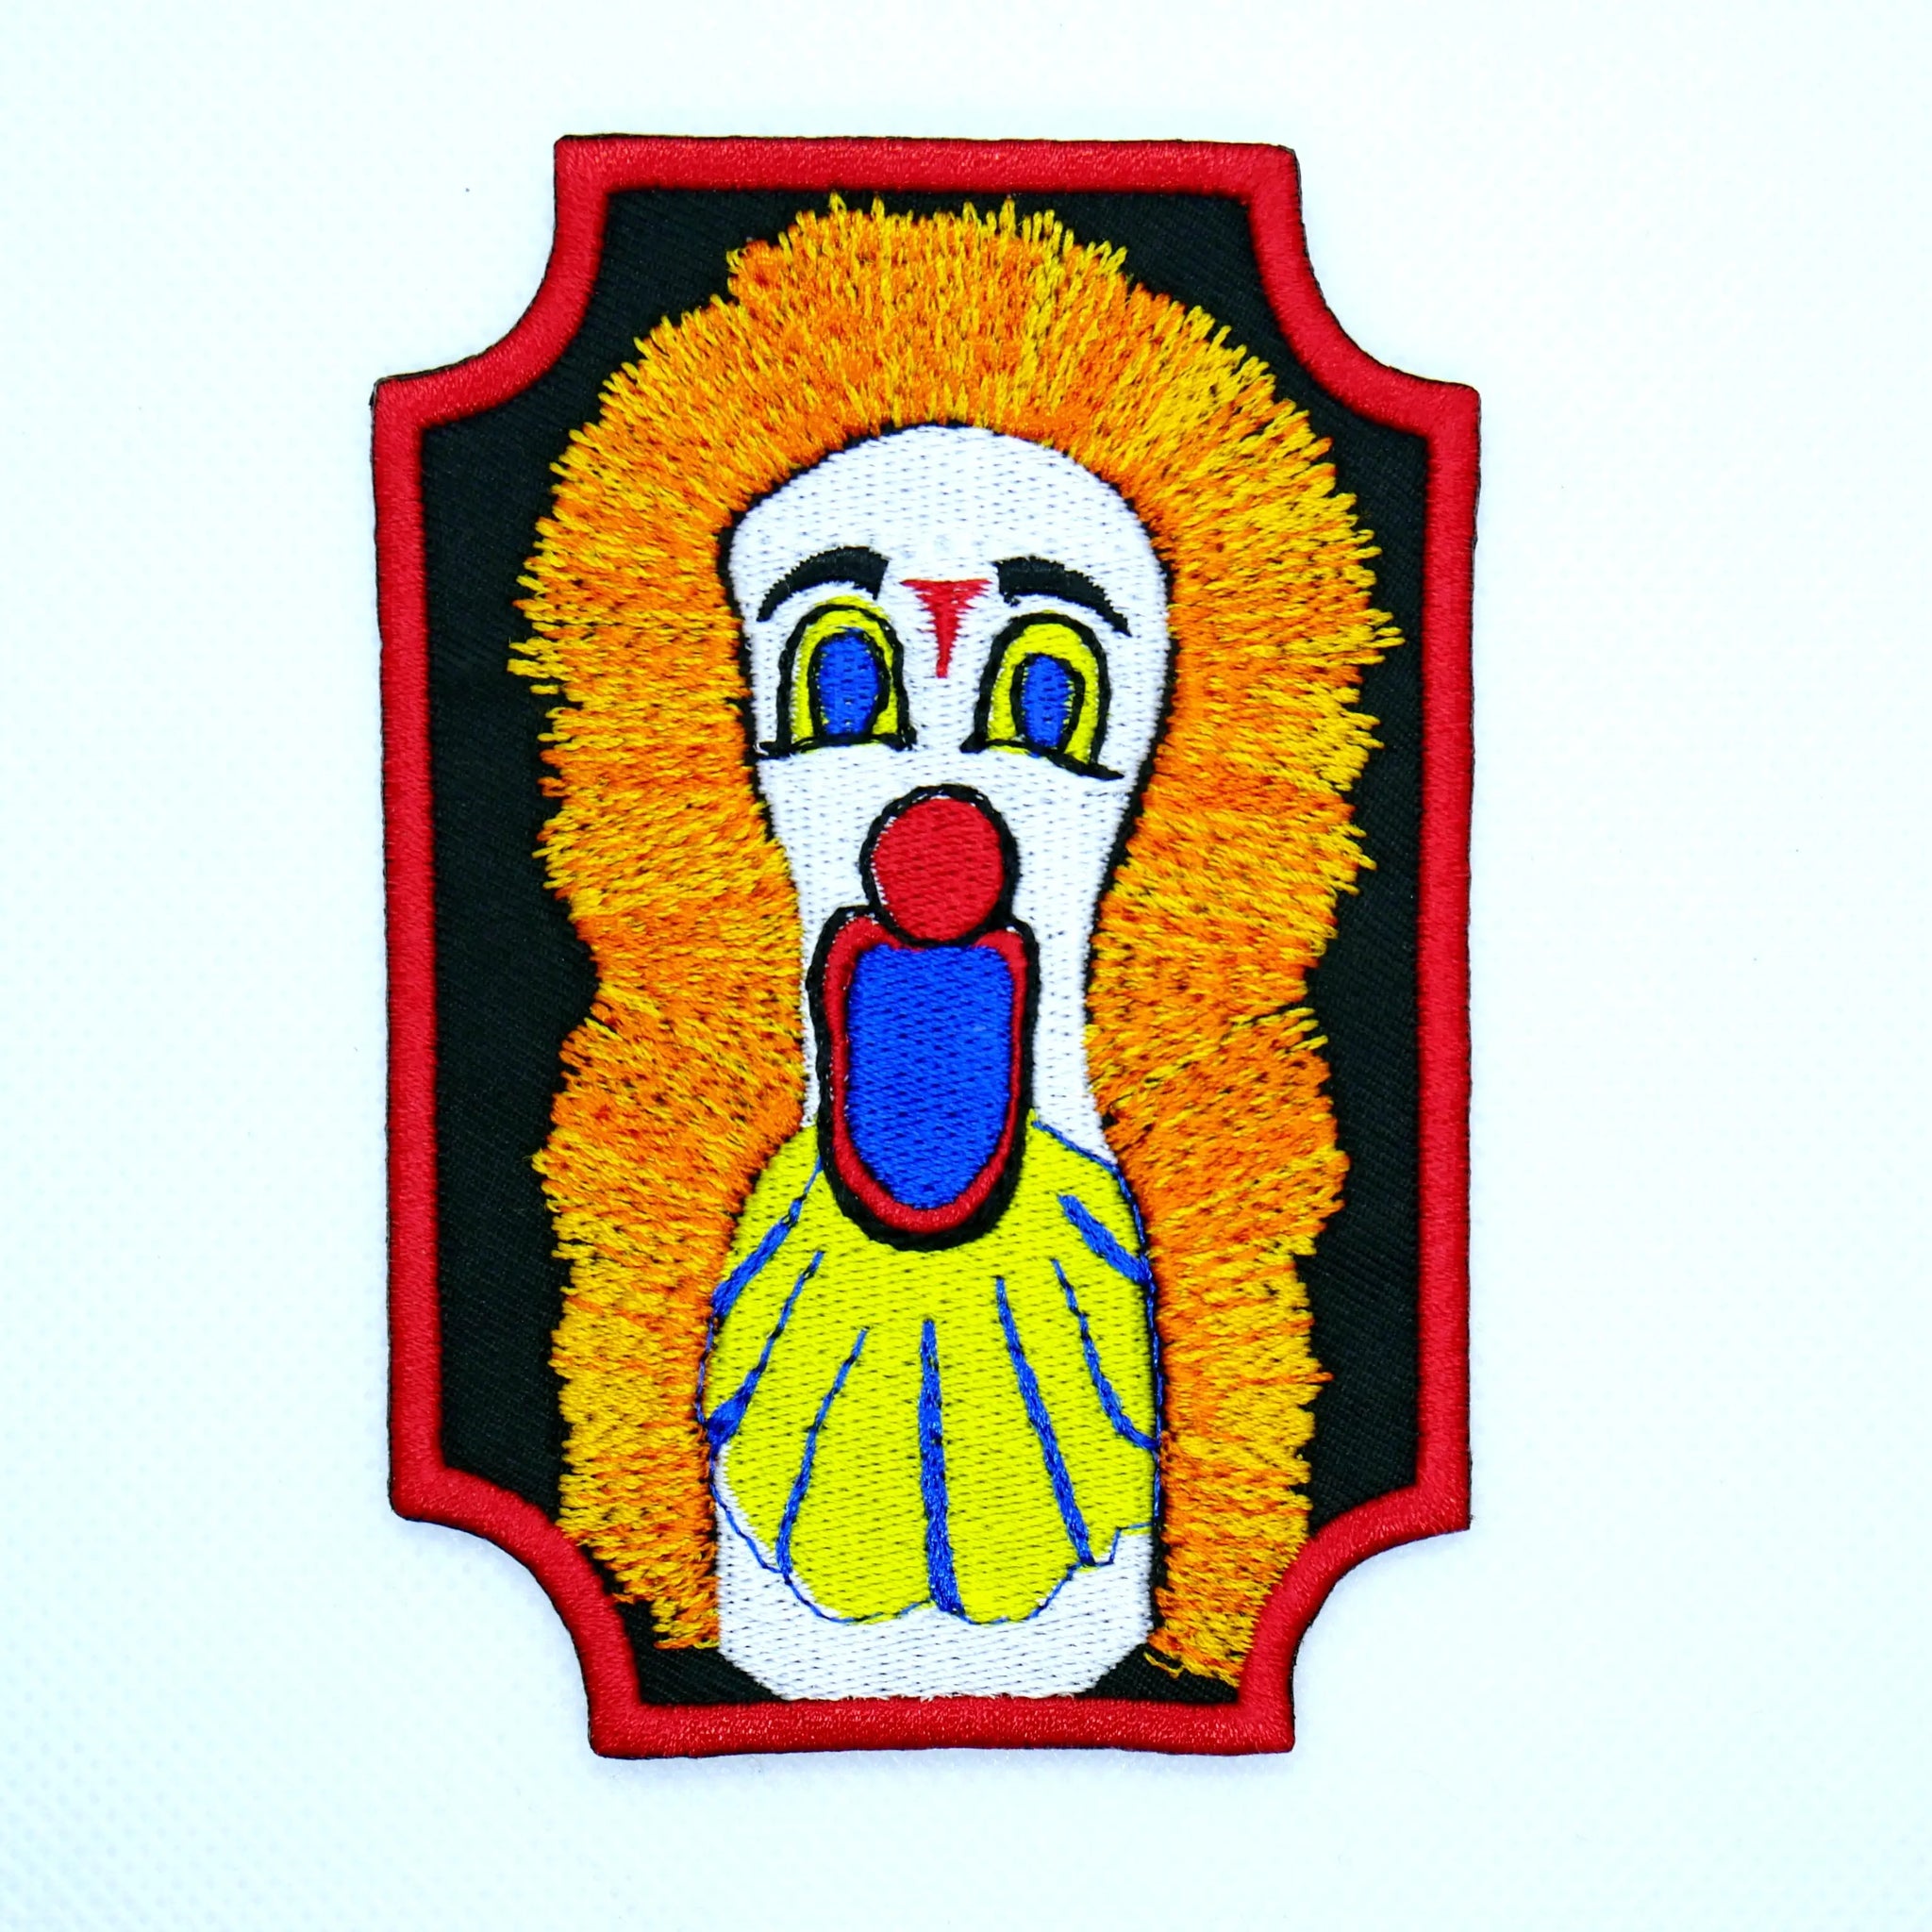 A rectangular black twill embroidered patch with scalloped edges and a bright red border featuring a white, blue, and red carnival style clown with an open mouth and bright orange hair.